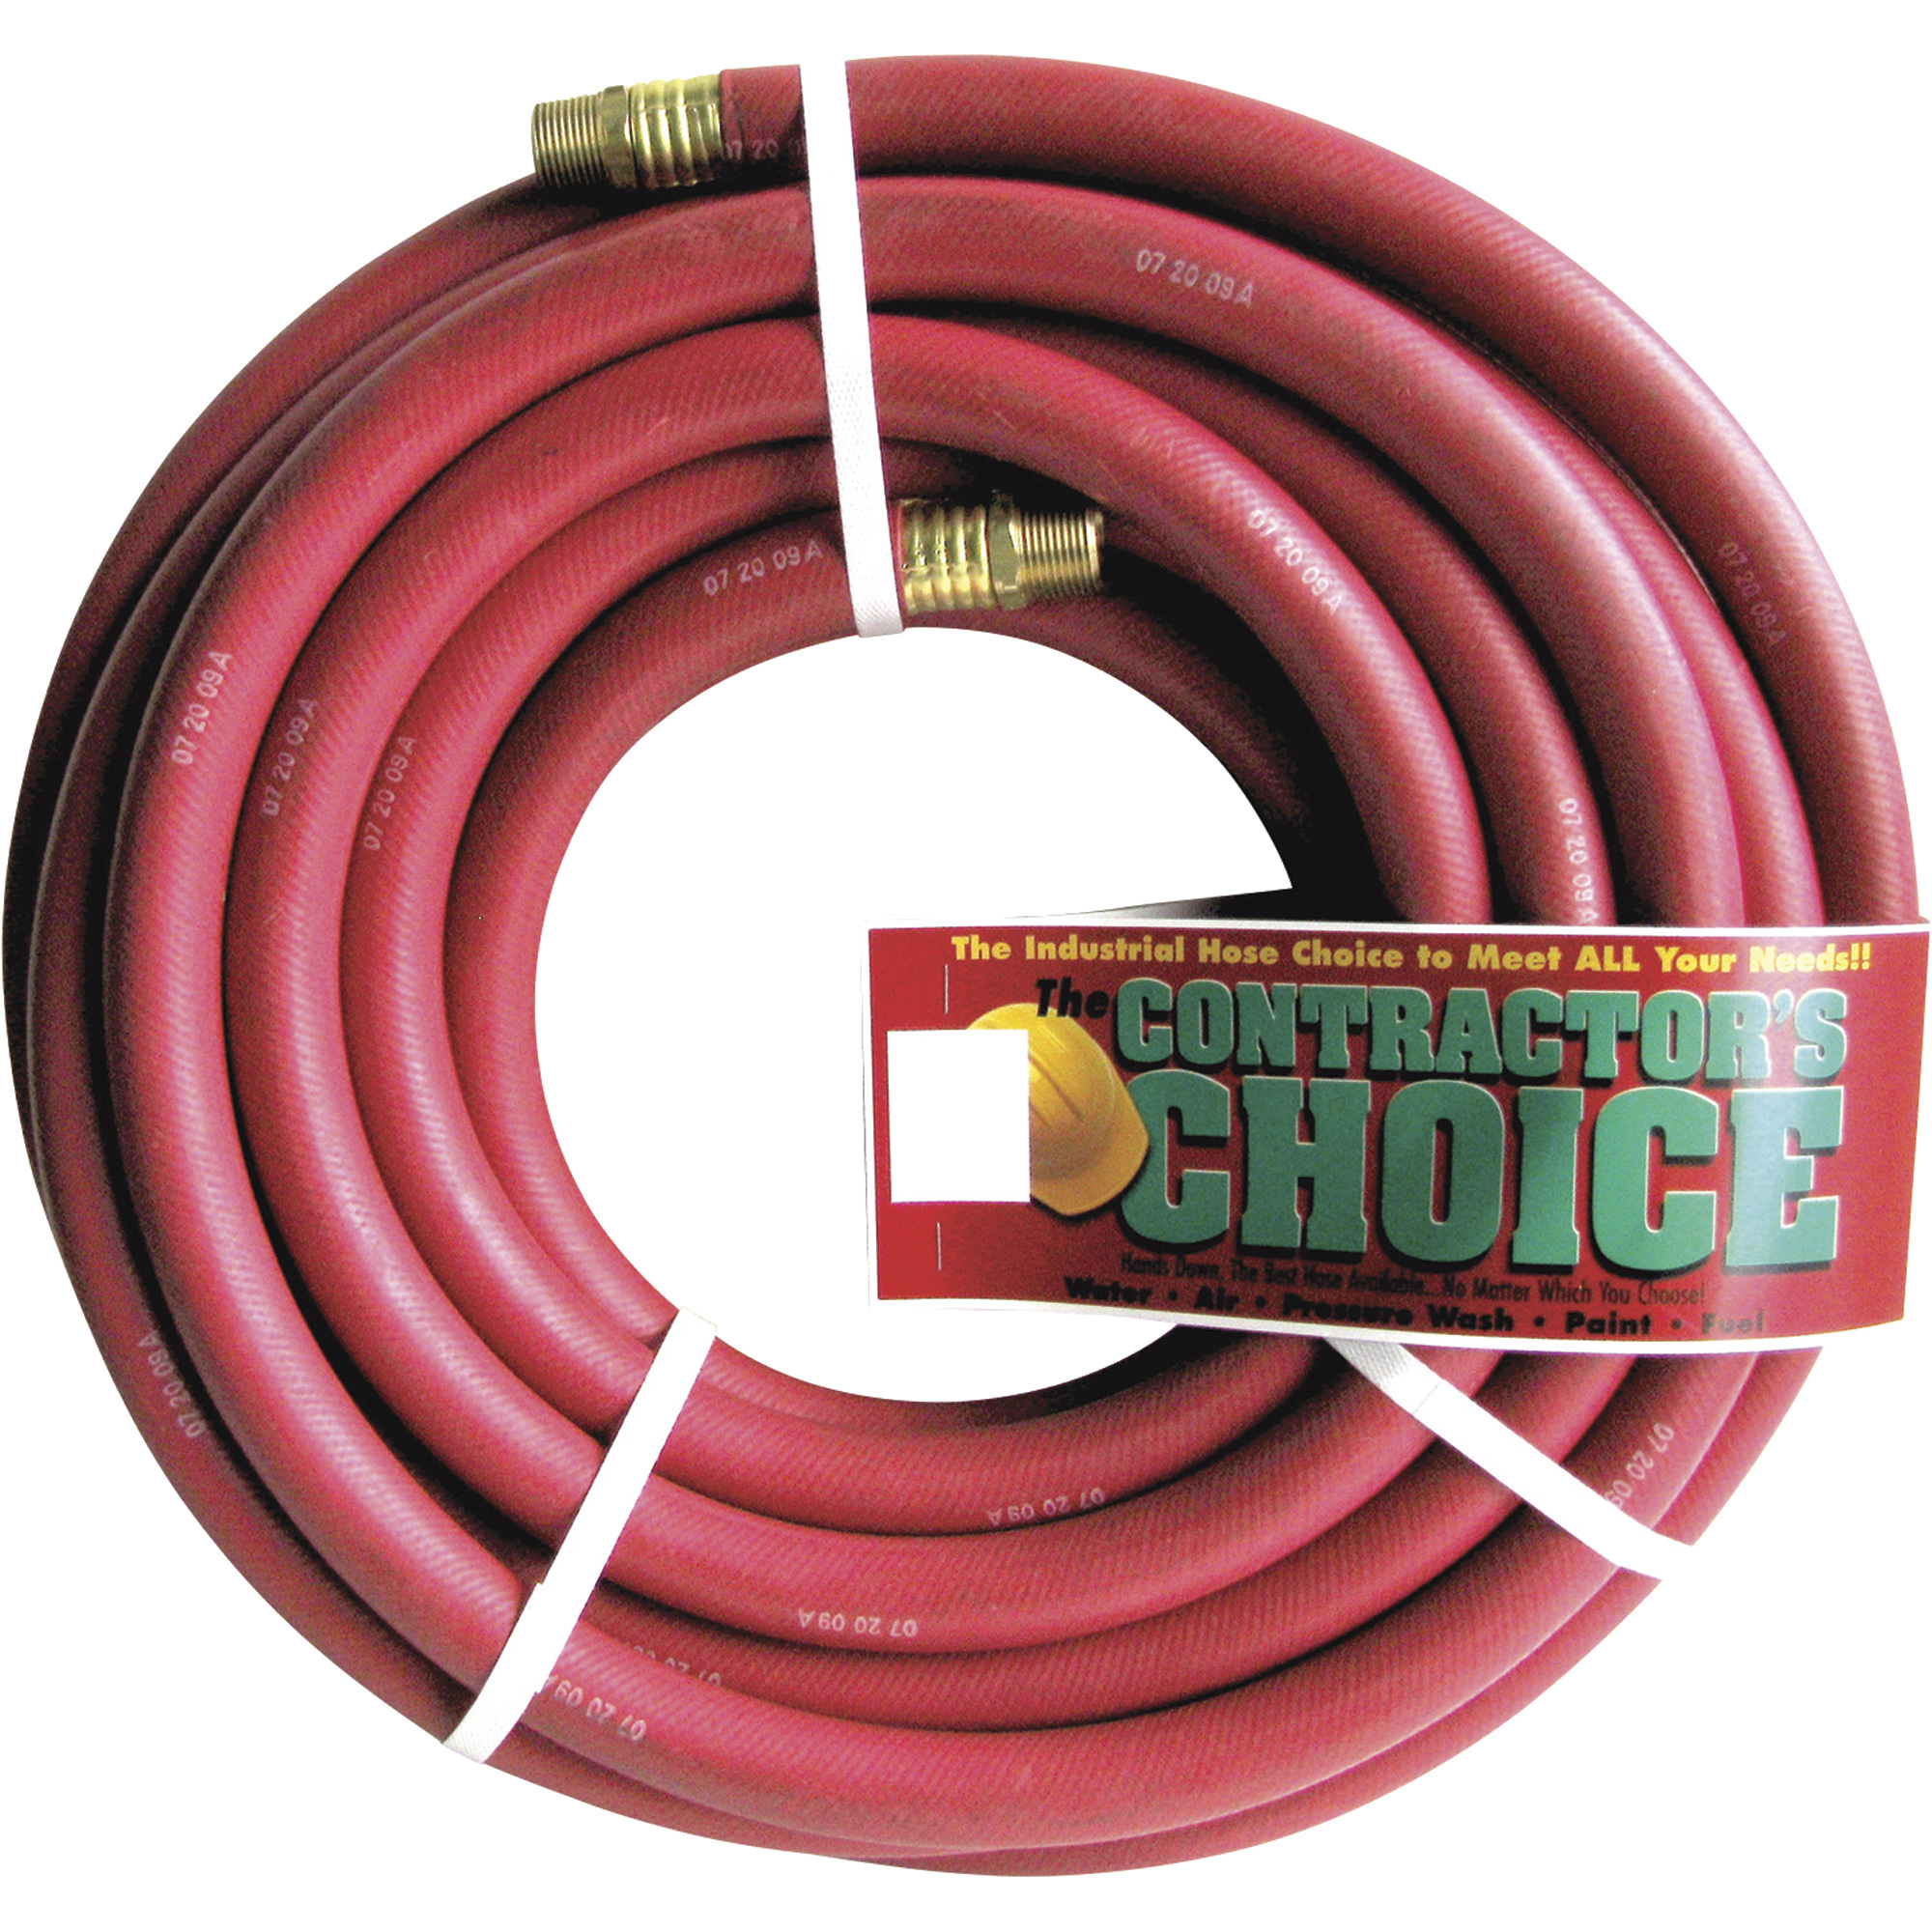 Industrial Red Rubber Hose â 3/4Inch x 50ft., 3/4Inch NPT Fittings, 300 PSI, Model RR3/4X50-300-12MP